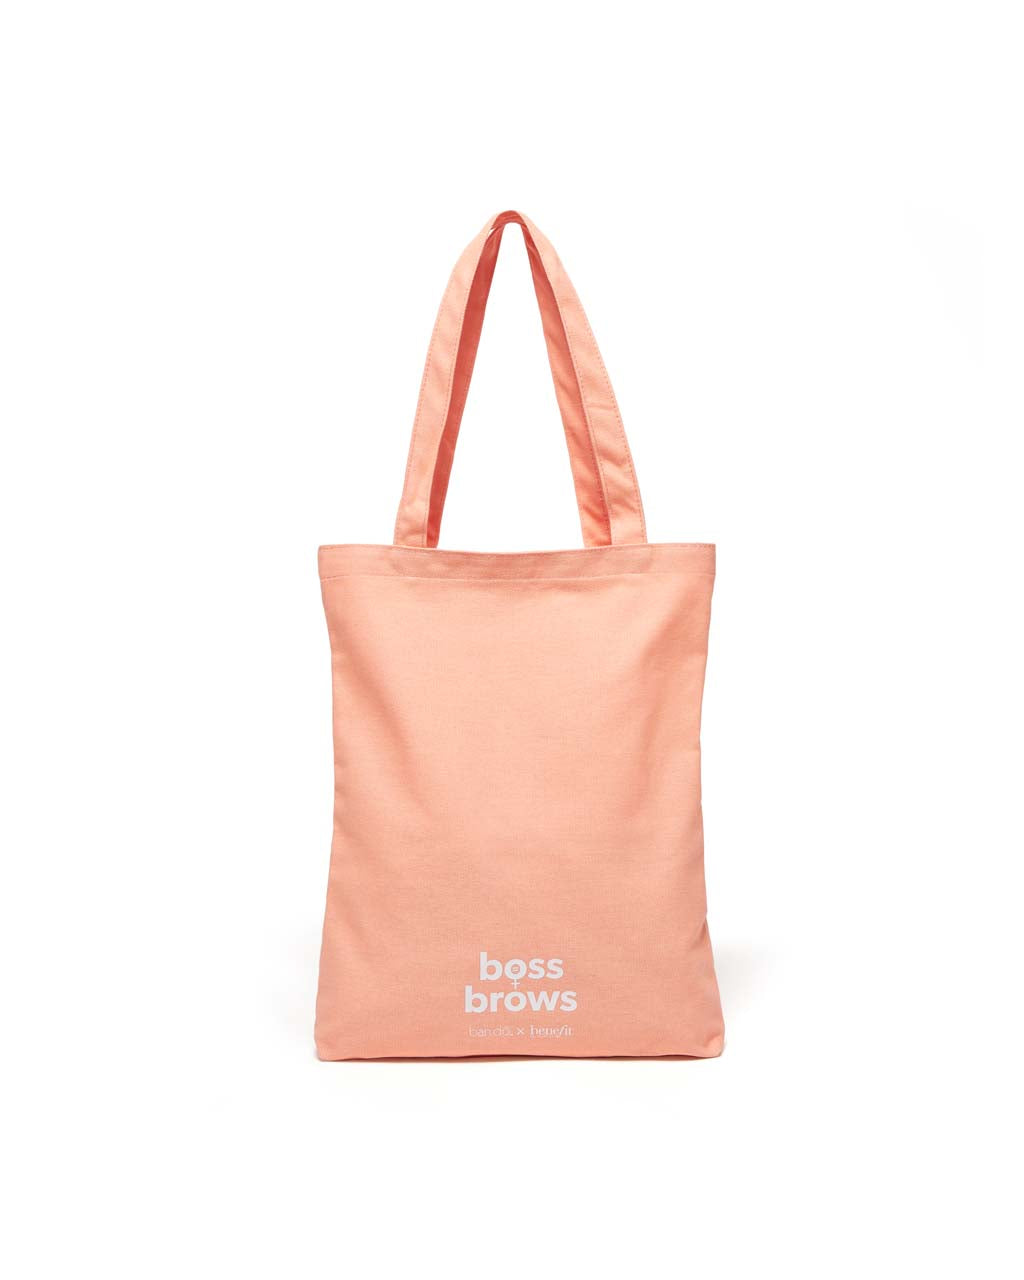 Tote Bag - Resilience by ban.do x benefit - tote - ban.do